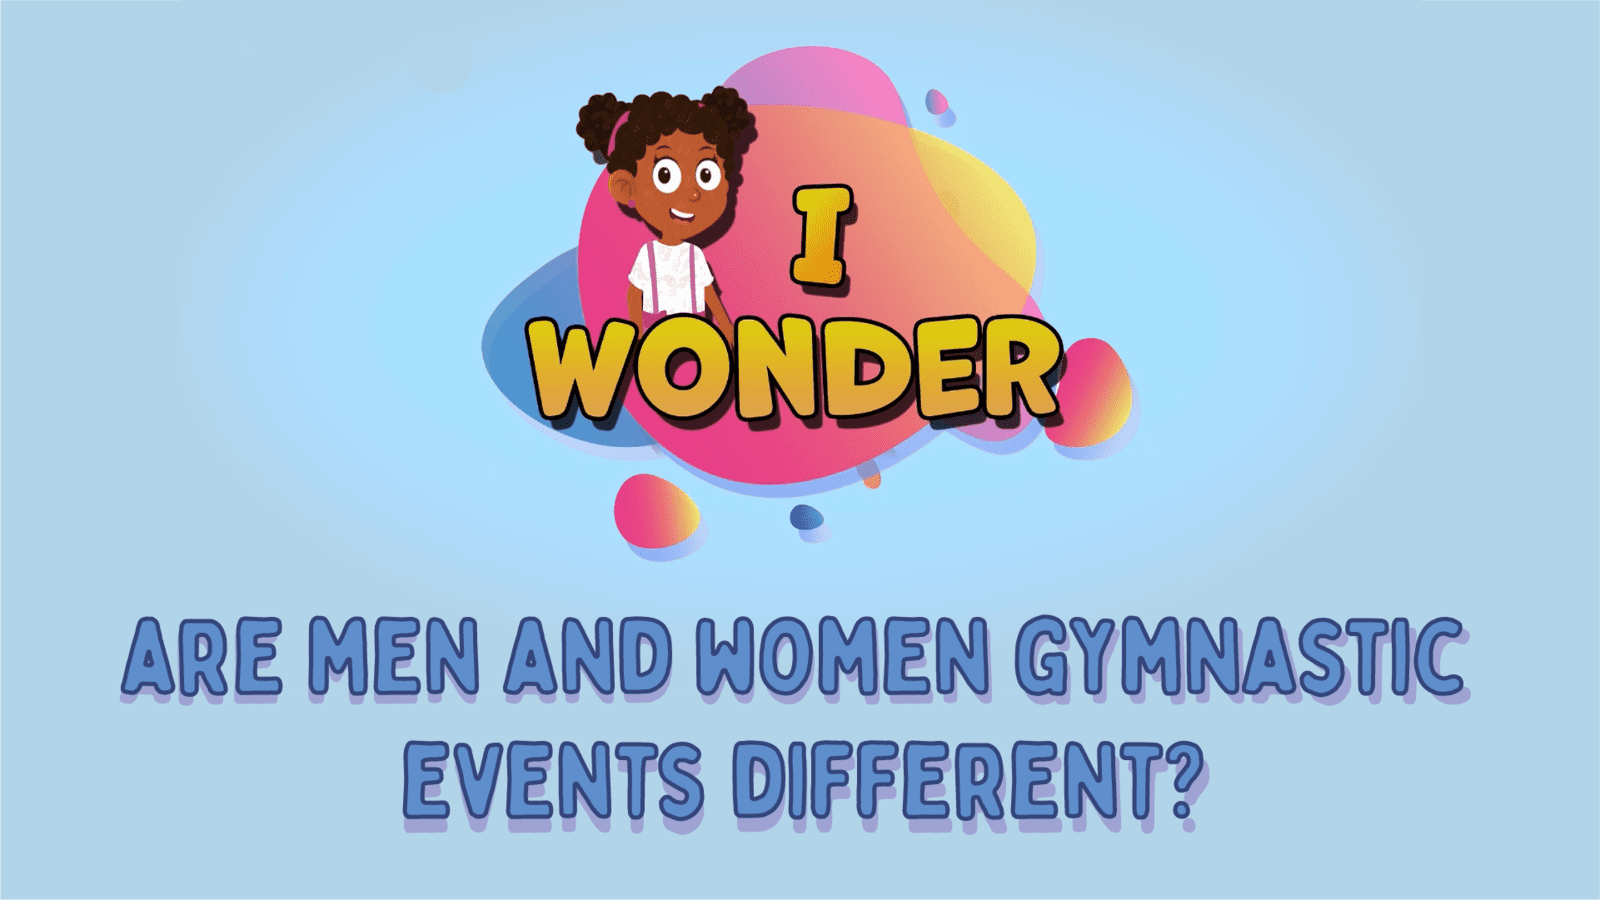 Are Men And Women’s Gymnastic Events Different?